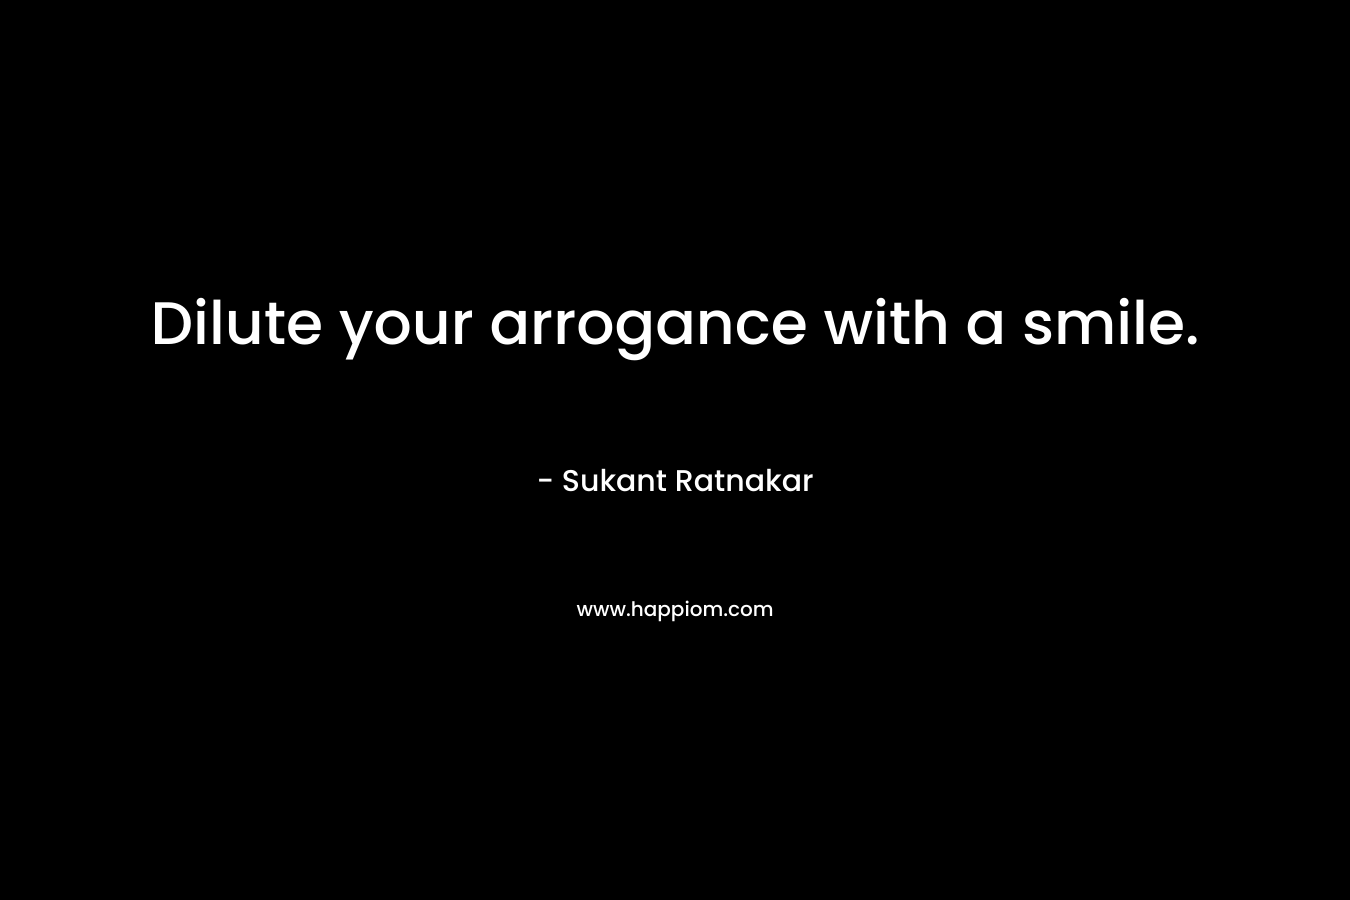 Dilute your arrogance with a smile. – Sukant Ratnakar